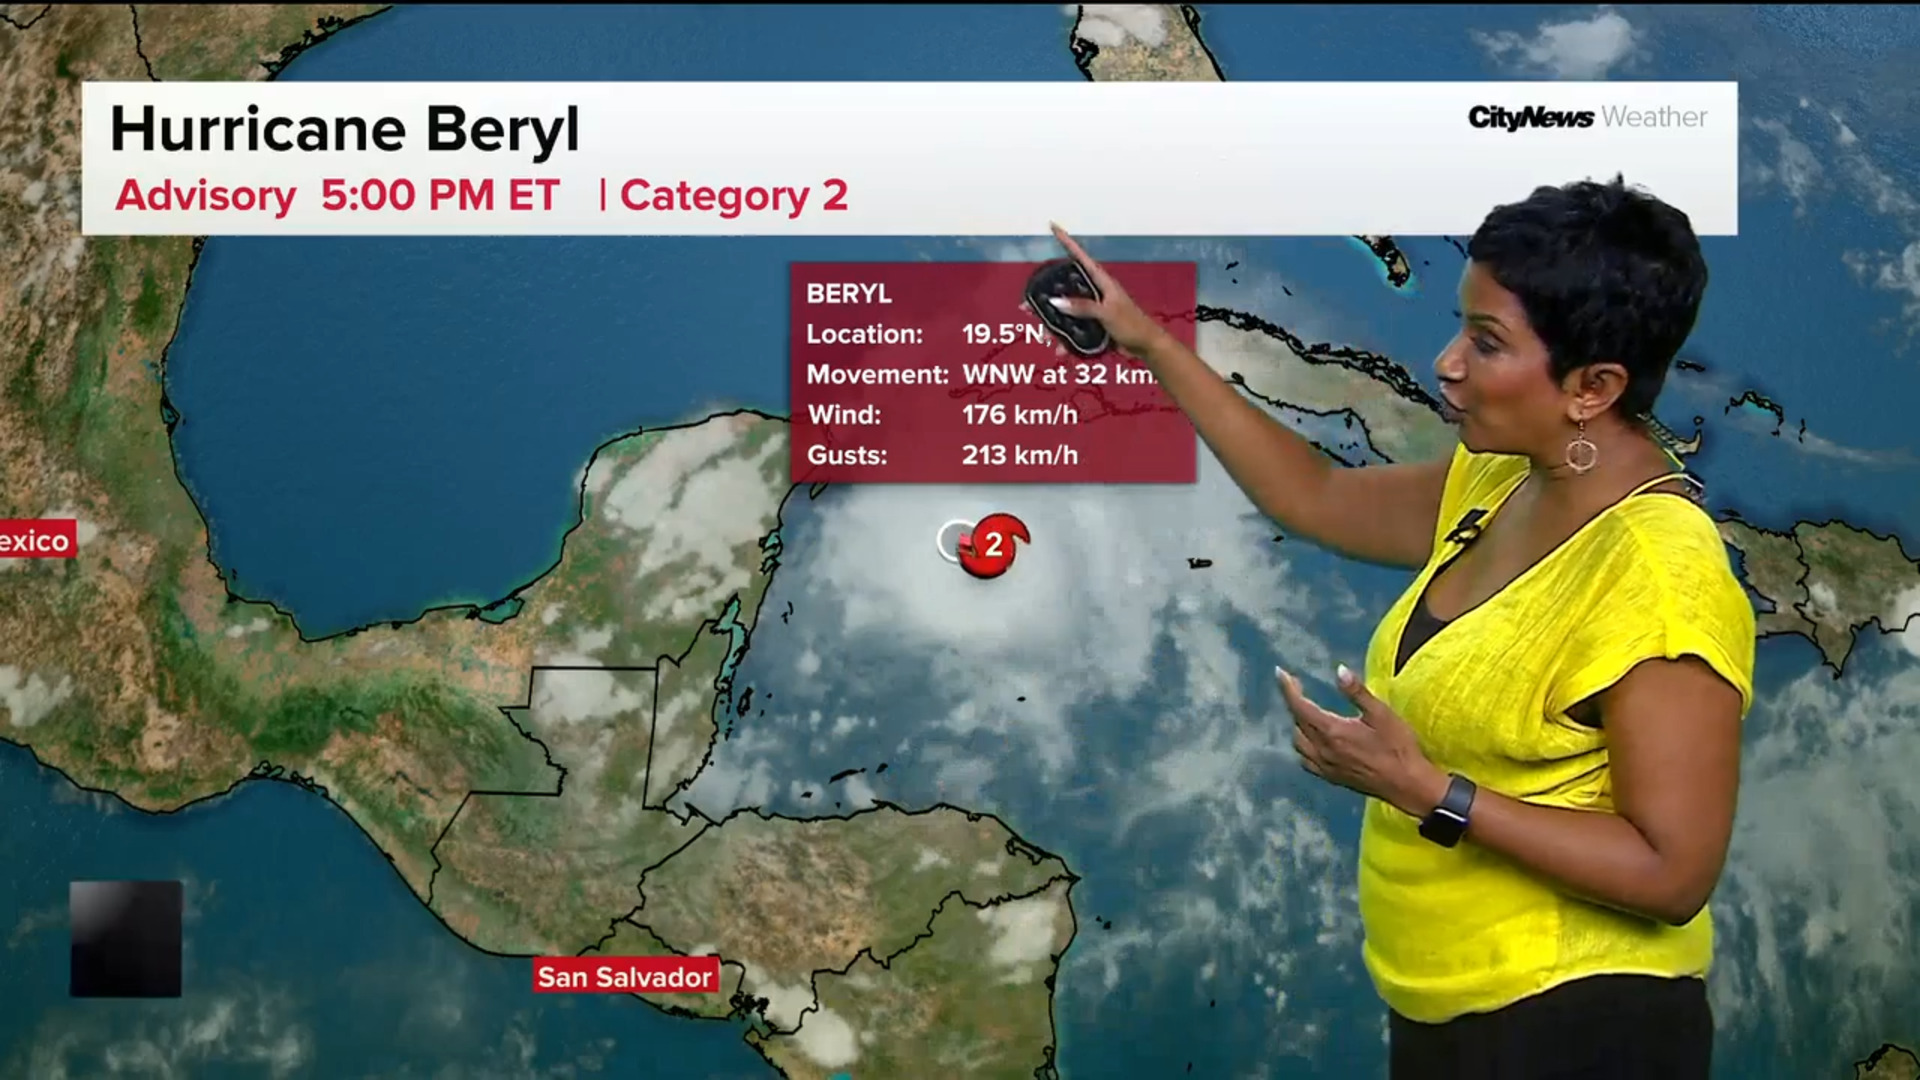 Looking at latest Hurricane Beryl models and the high humidex values in the GTA forecast